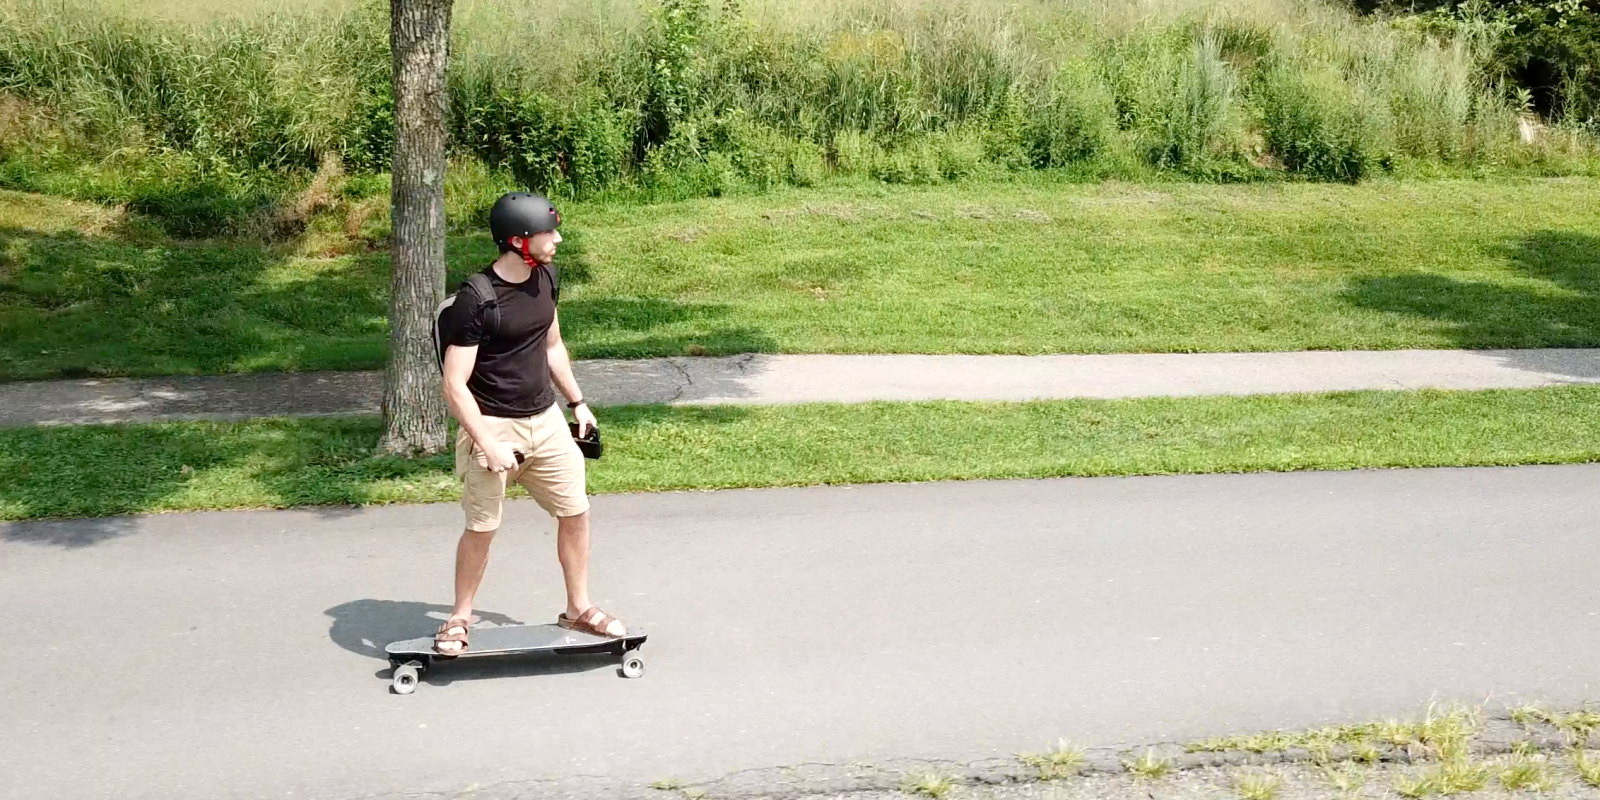 Top 5 Reasons That Cause You to Fall off The Electric Skateboard